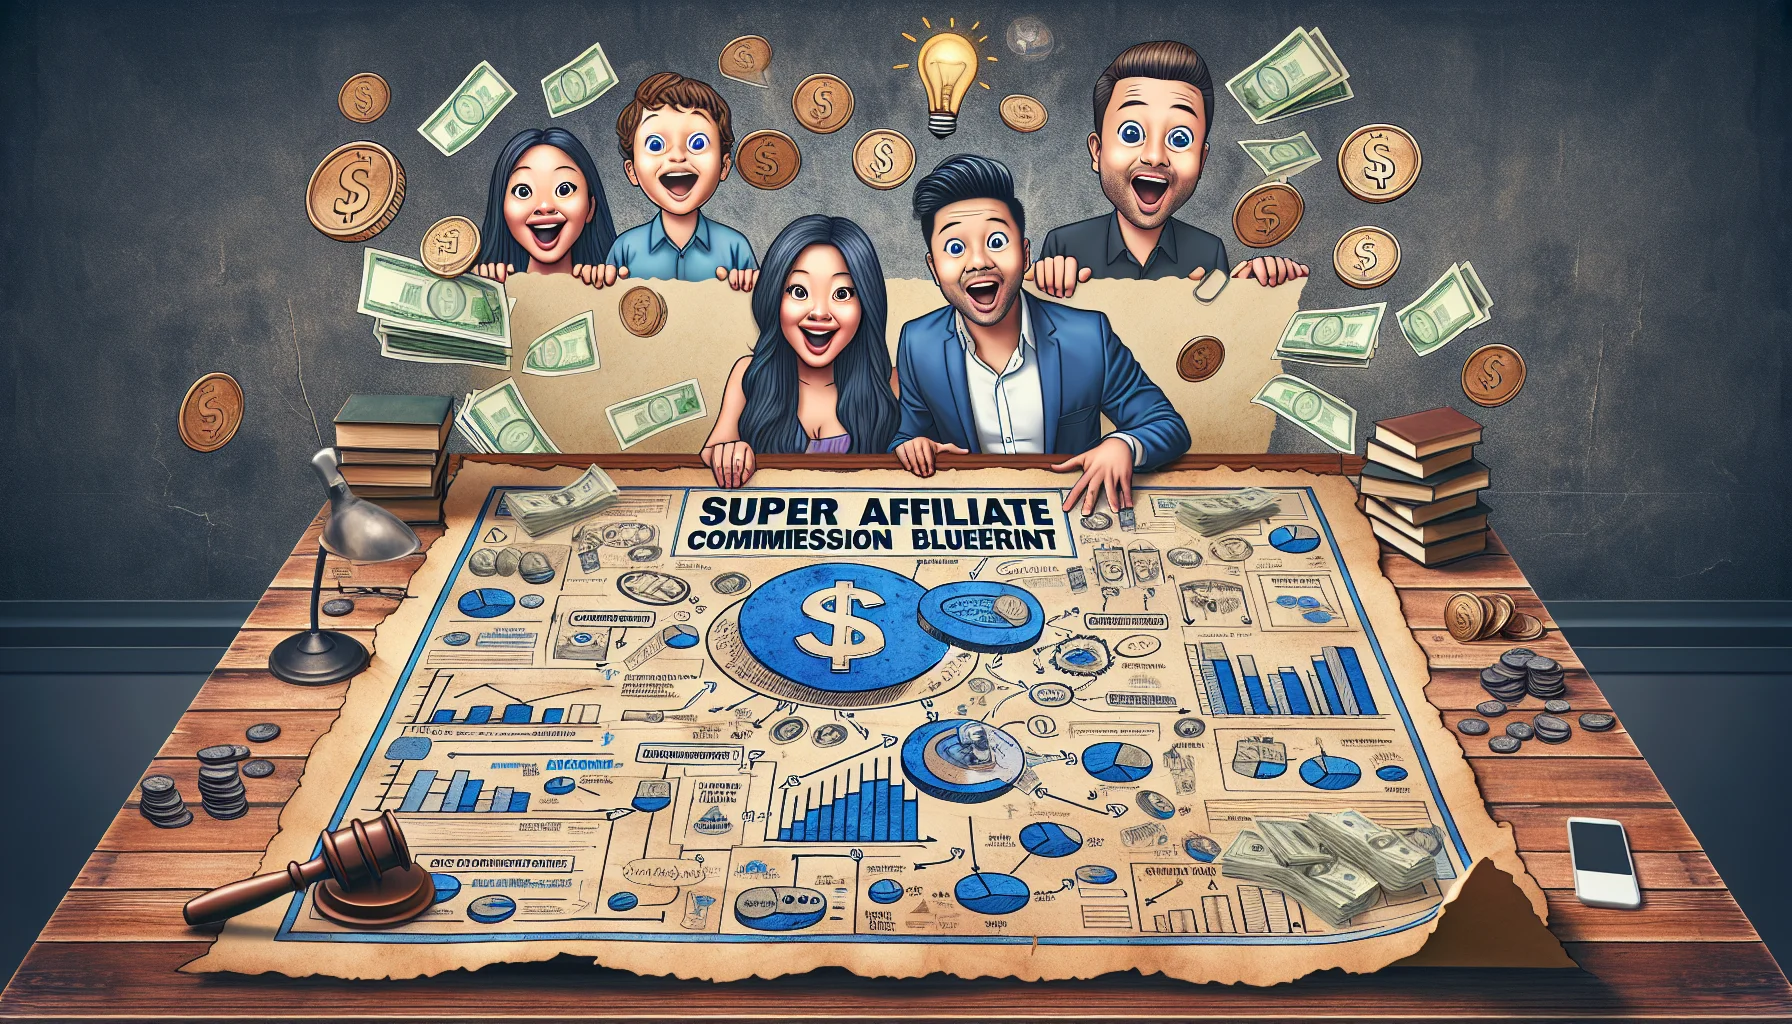 Imagine a cartoonish yet realistic image that humorously illustrates the concept of 'Super Affiliate Commission Blueprint'. There's a large blueprint spread out on an old oak desk with figures and diagrams that are symbols for online money-making strategies like eCommerce, affiliate marketing, and SEO optimization. Coins and dollar bills are popping out from the document representing huge profits. A well-crafted light bulb symbol representing bright ideas is hovering above the blueprint. Excited faces of an Asian woman and a Middle Eastern man are peeking over the blueprint. They are both dressed casually, symbols of successful online entrepreneurs. Their facial expressions are joyous and amazed, depicting the exciting world of online affiliate marketing.